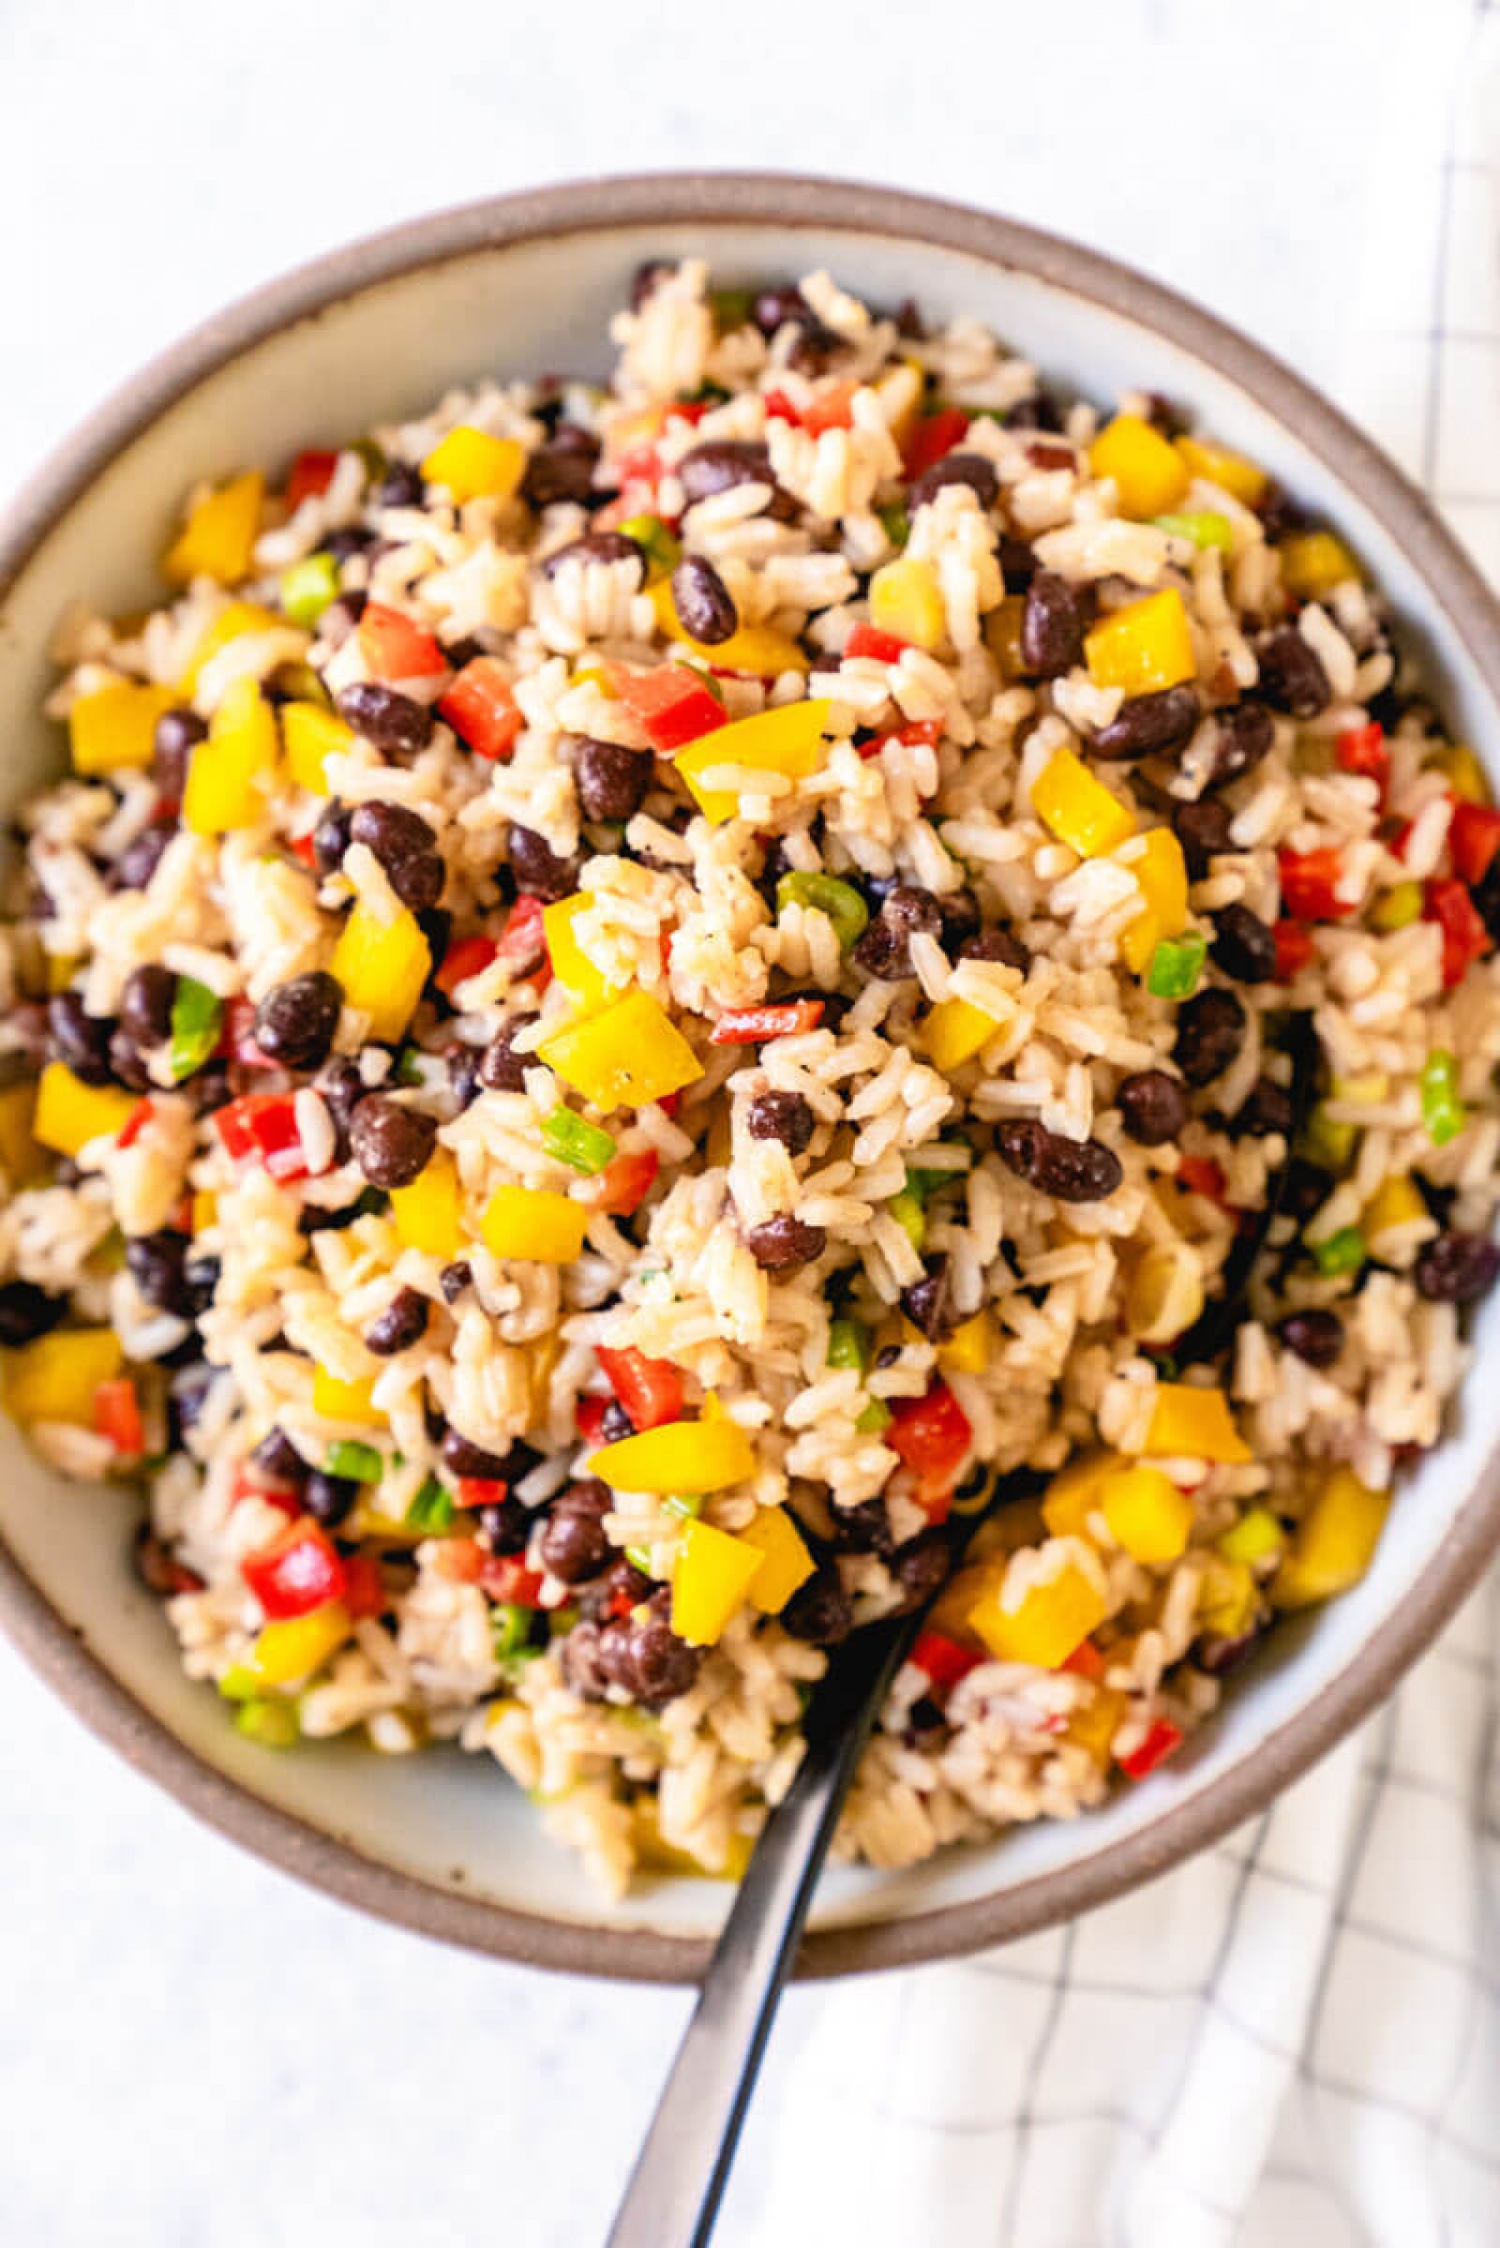 <p>For your next island-inspired meal or cookout, serve up this refreshing black bean salad with rice, crispy veggies and a tangy vinaigrette. It also provides a great way to use up leftover cooked rice! <a href="https://www.acouplecooks.com/caribbean-black-bean-salad/" rel="noopener">Get the recipe here.</a></p>